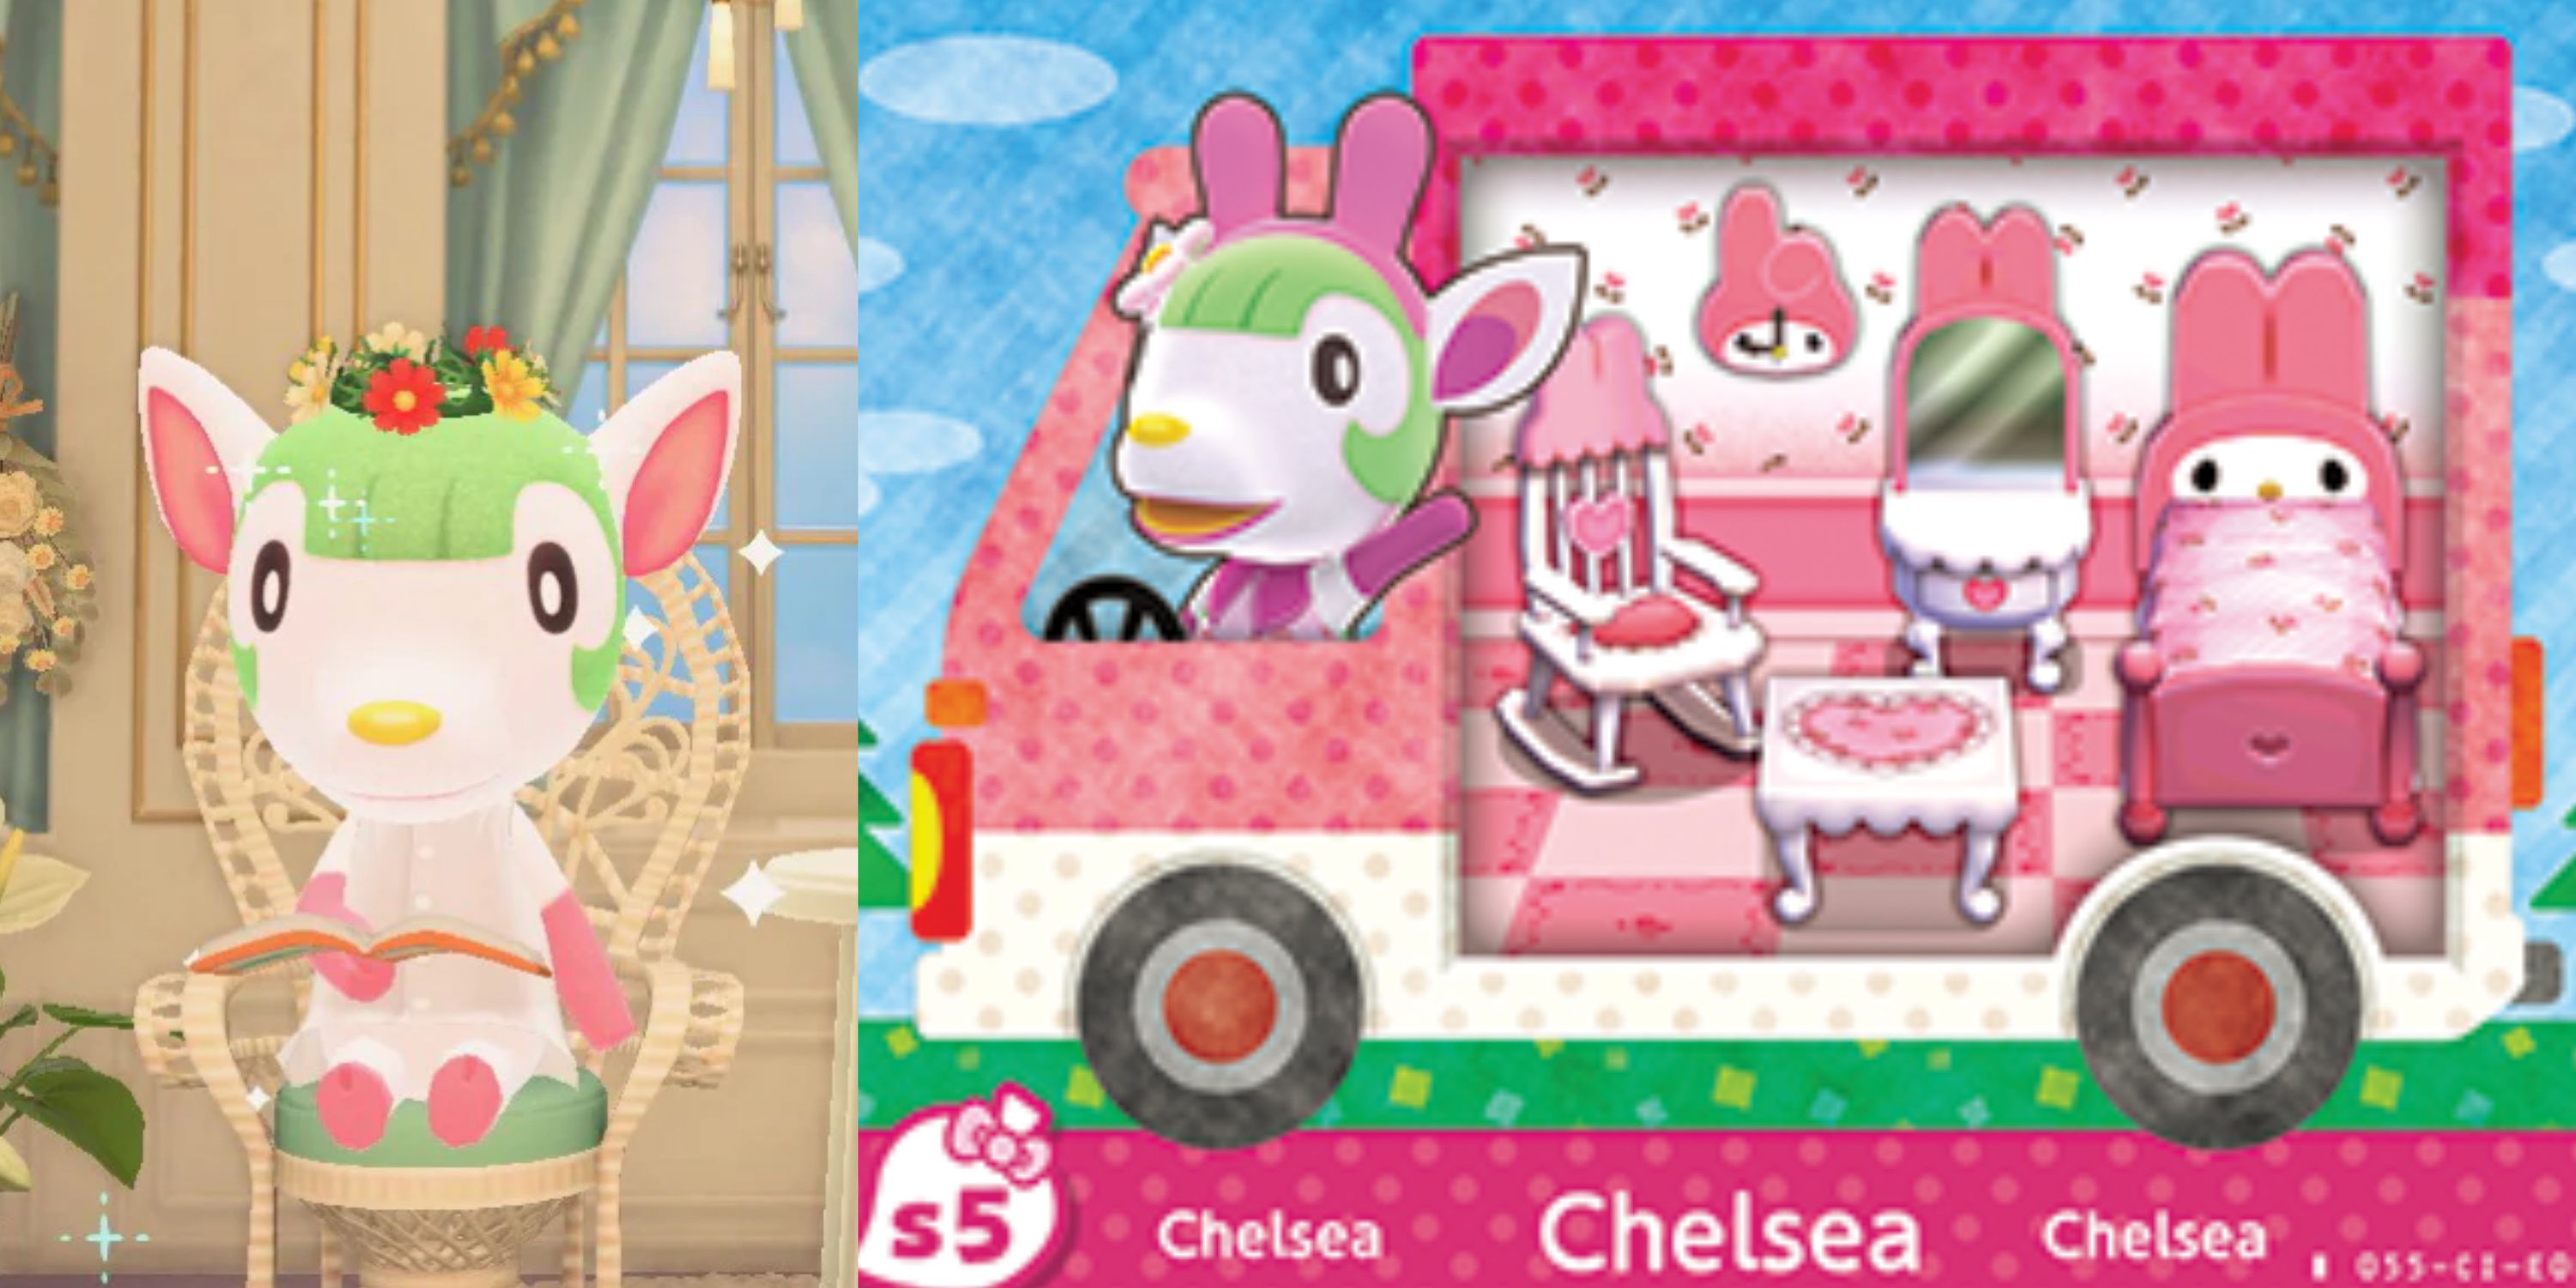 Chelsea is a My Melody inspired Deer villager